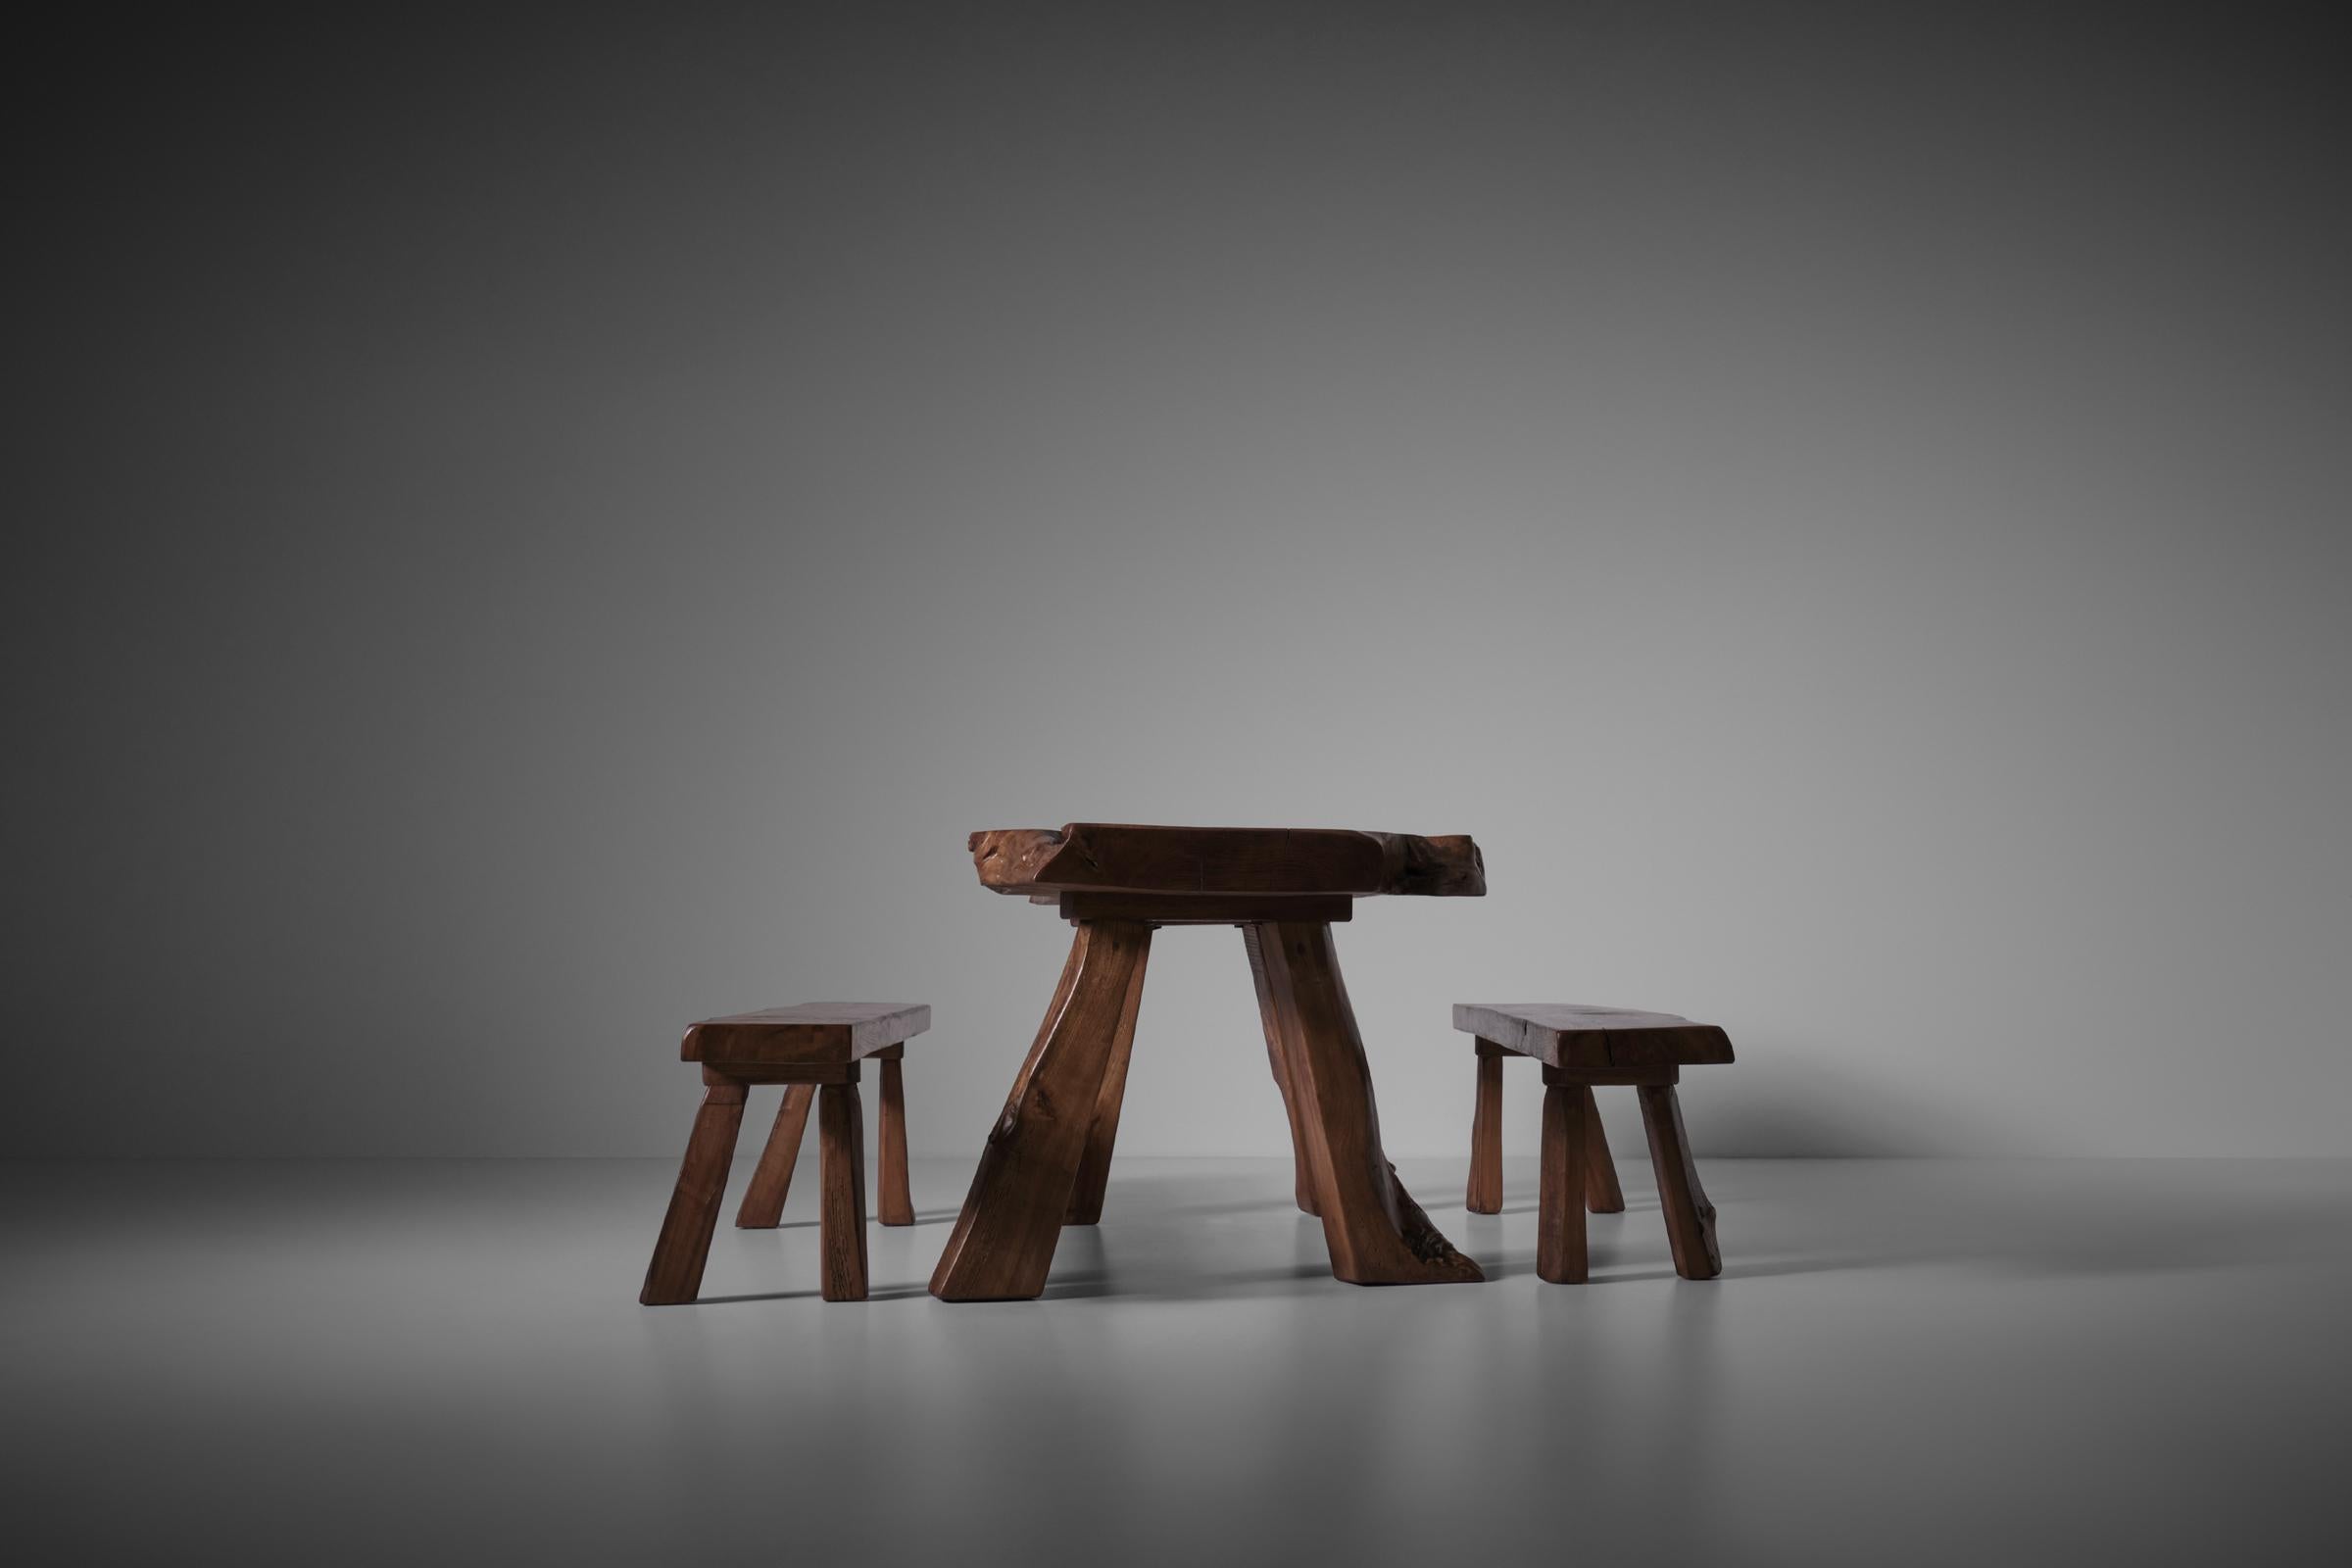 Live Edge Elm Wooden Table and Benches, France 1970s For Sale 1